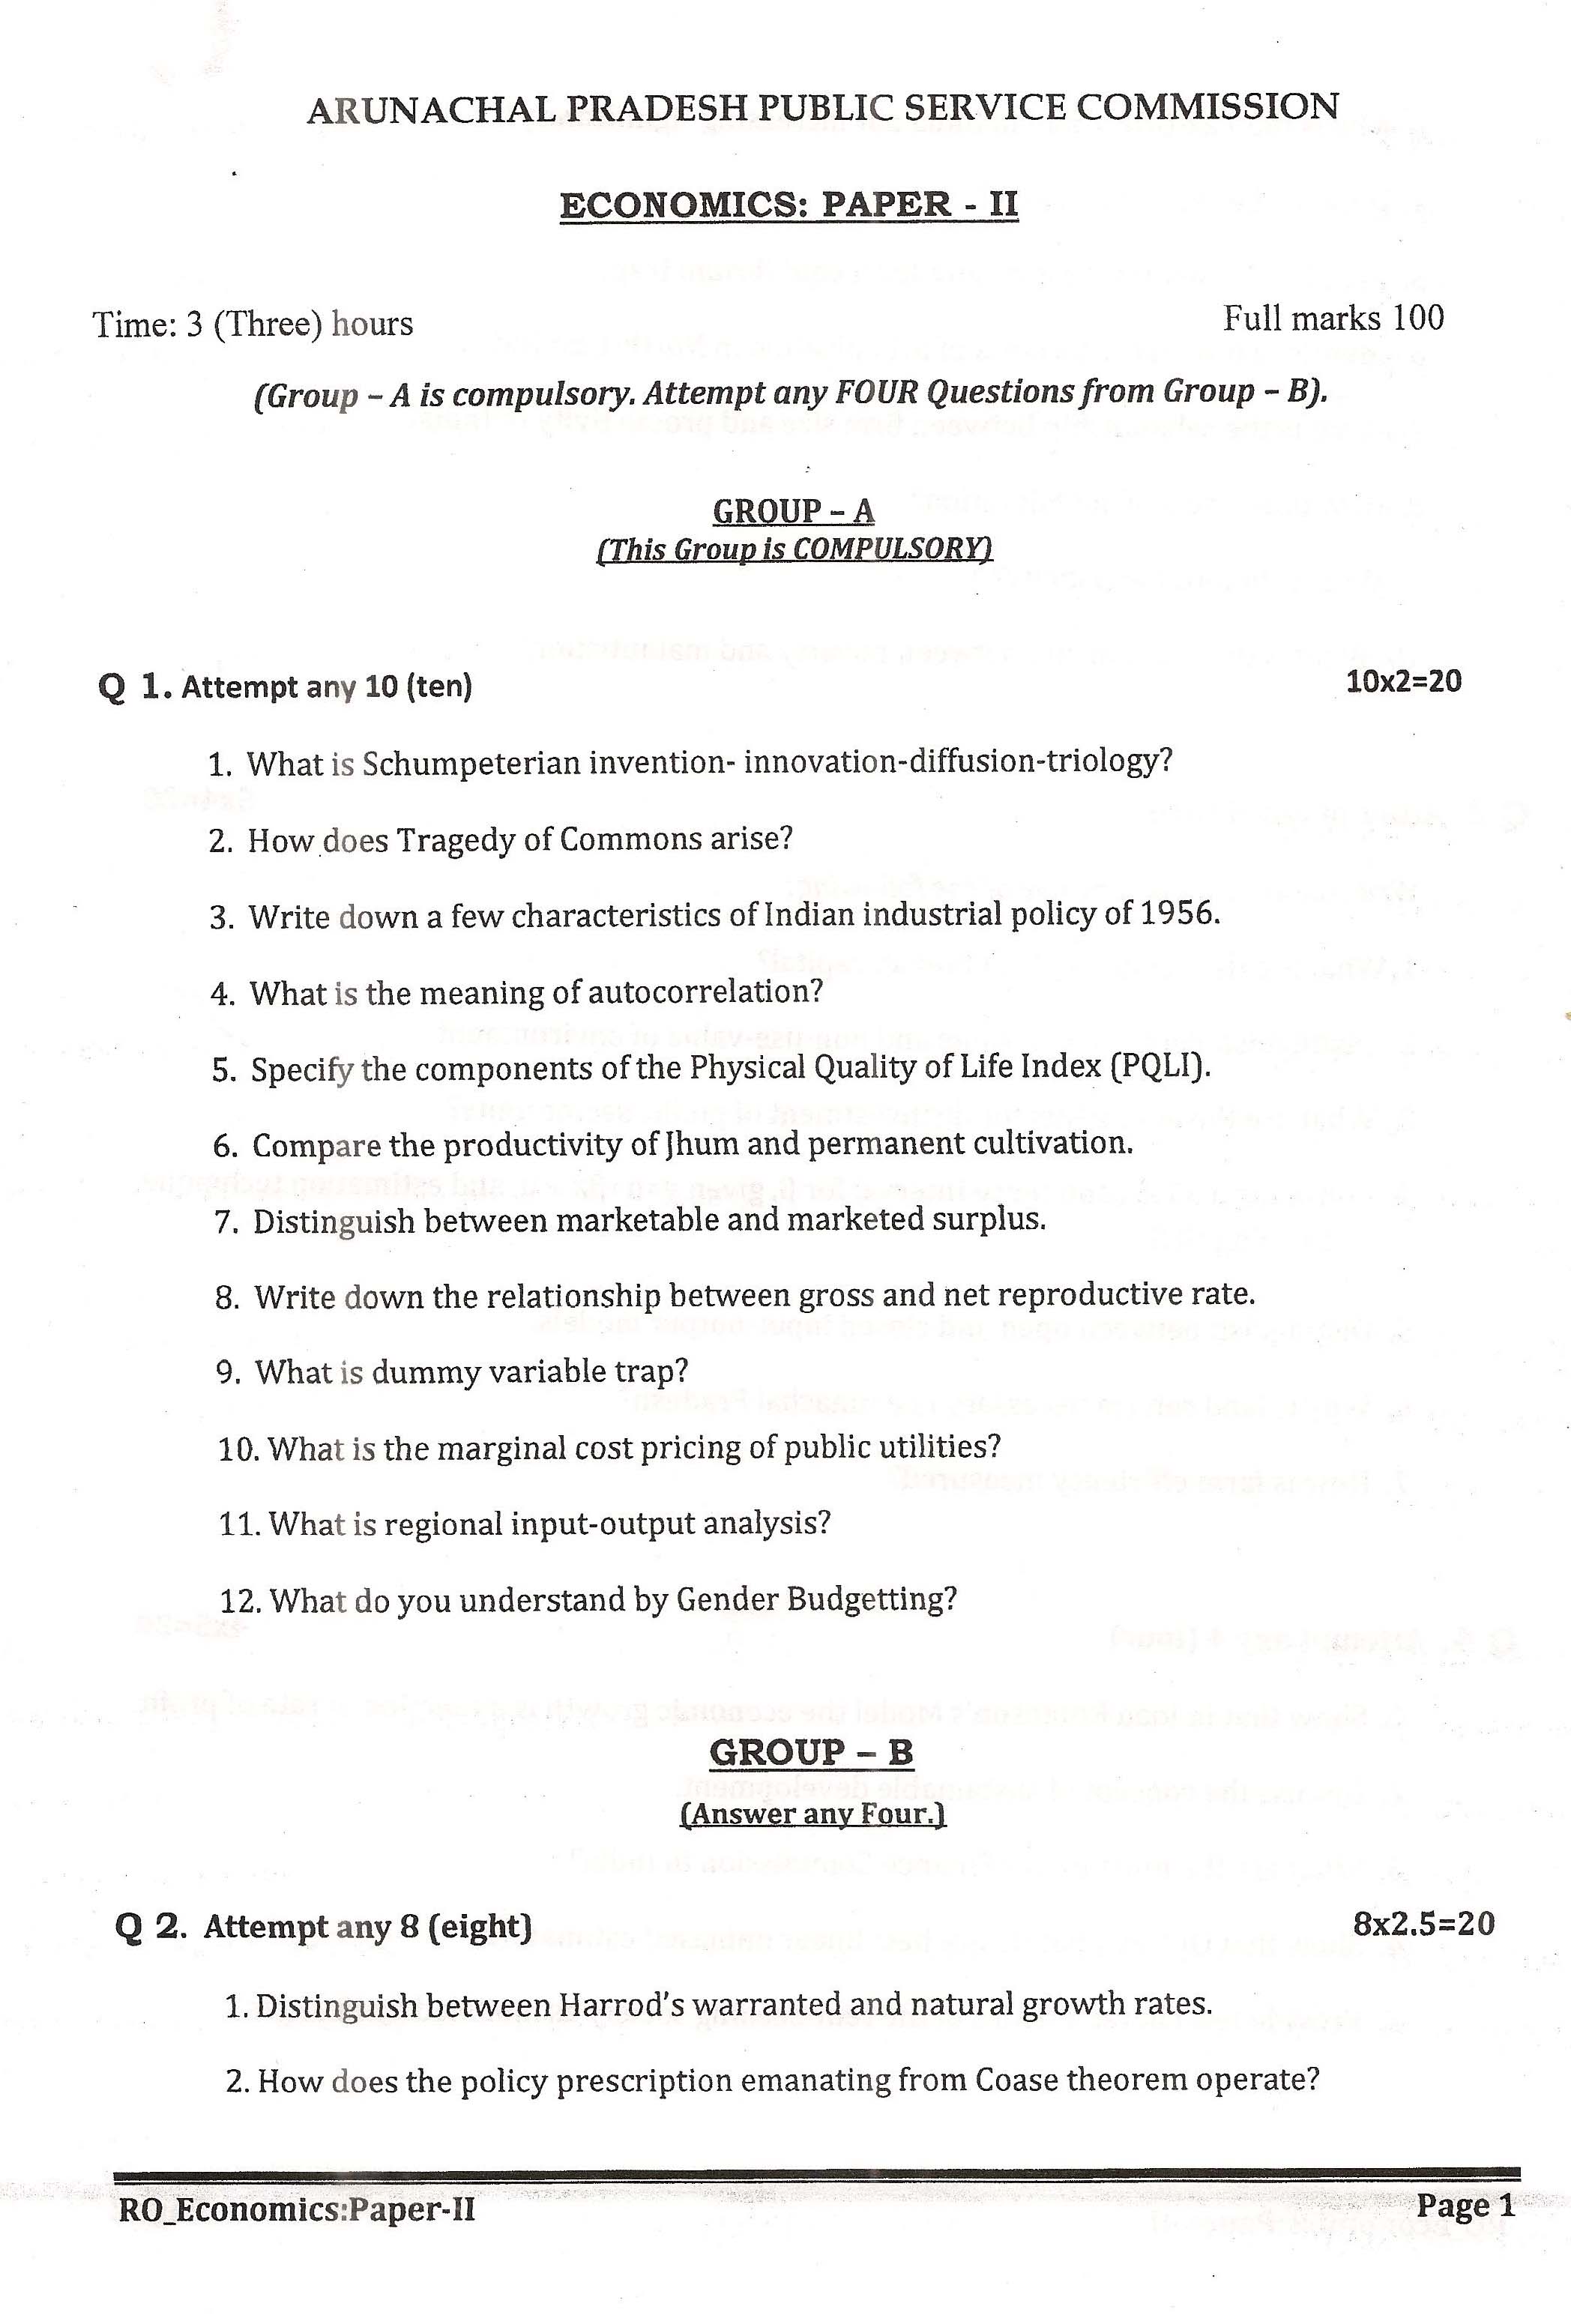 APPSC Research Officer Economics Paper II Exam Question Paper 2014 1